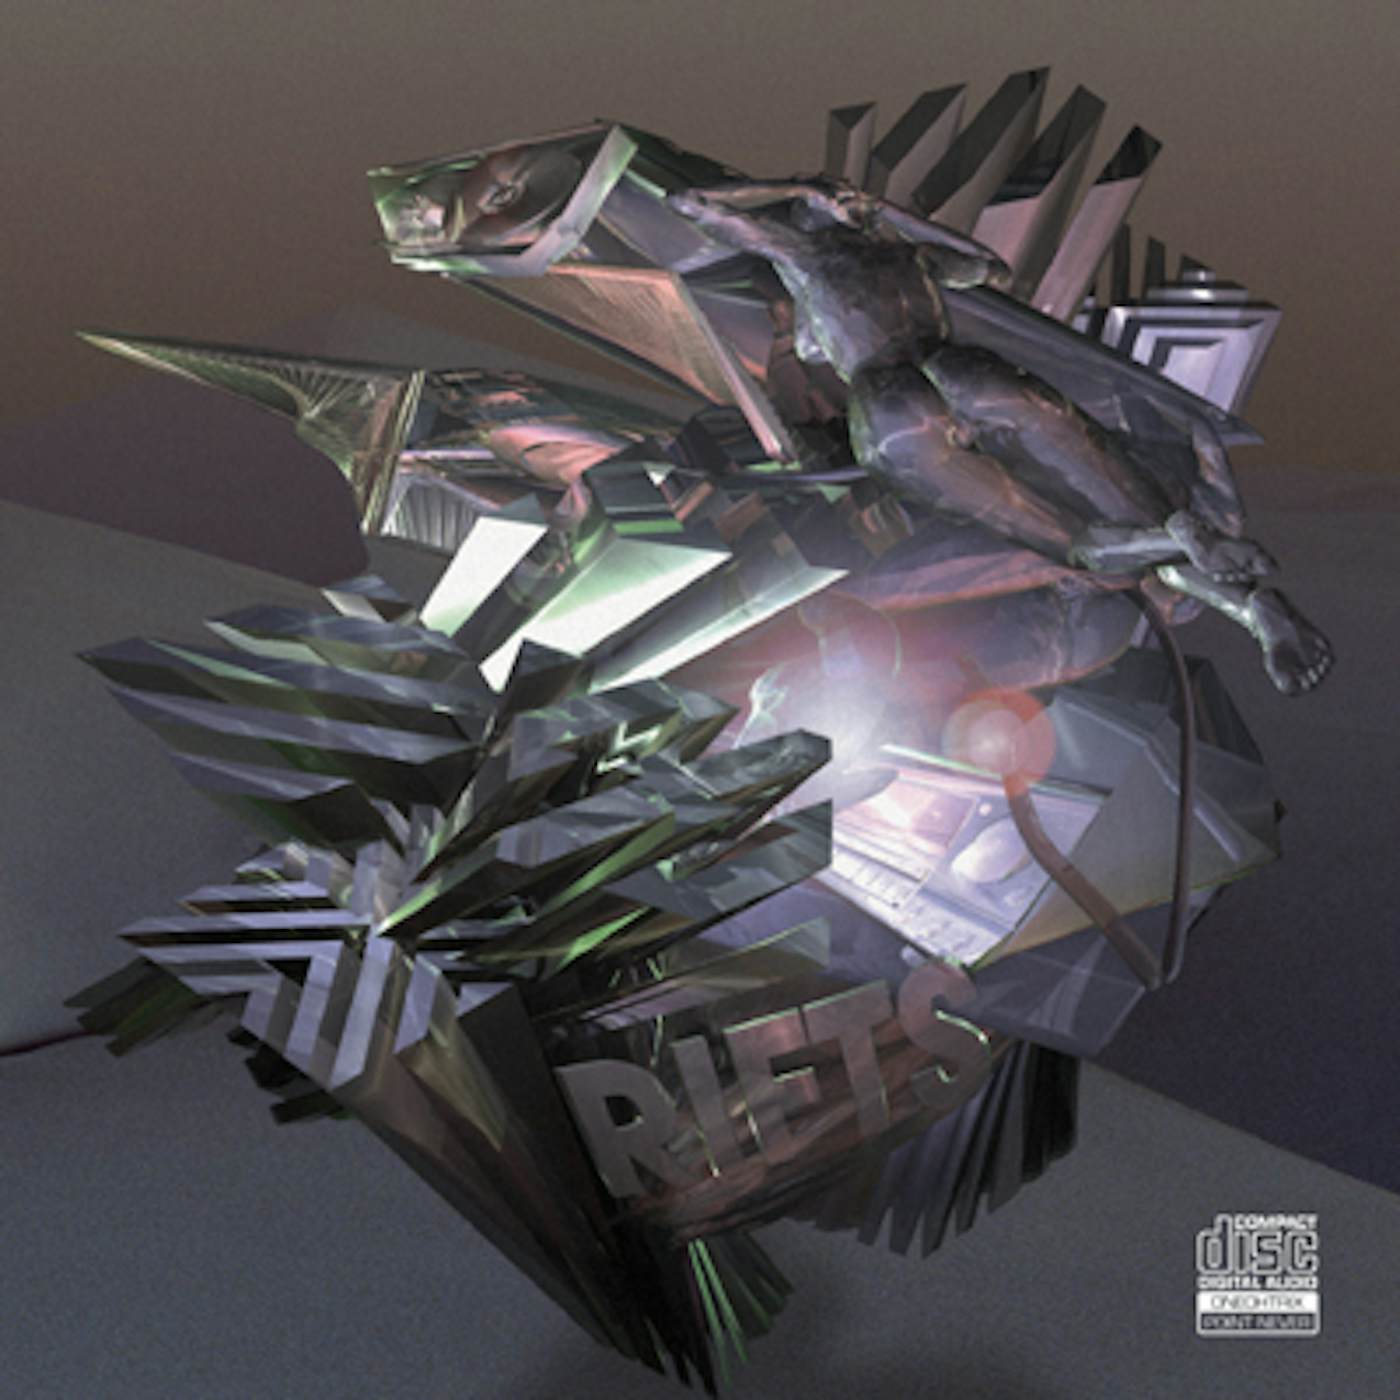 Oneohtrix Point Never RIFTS CD